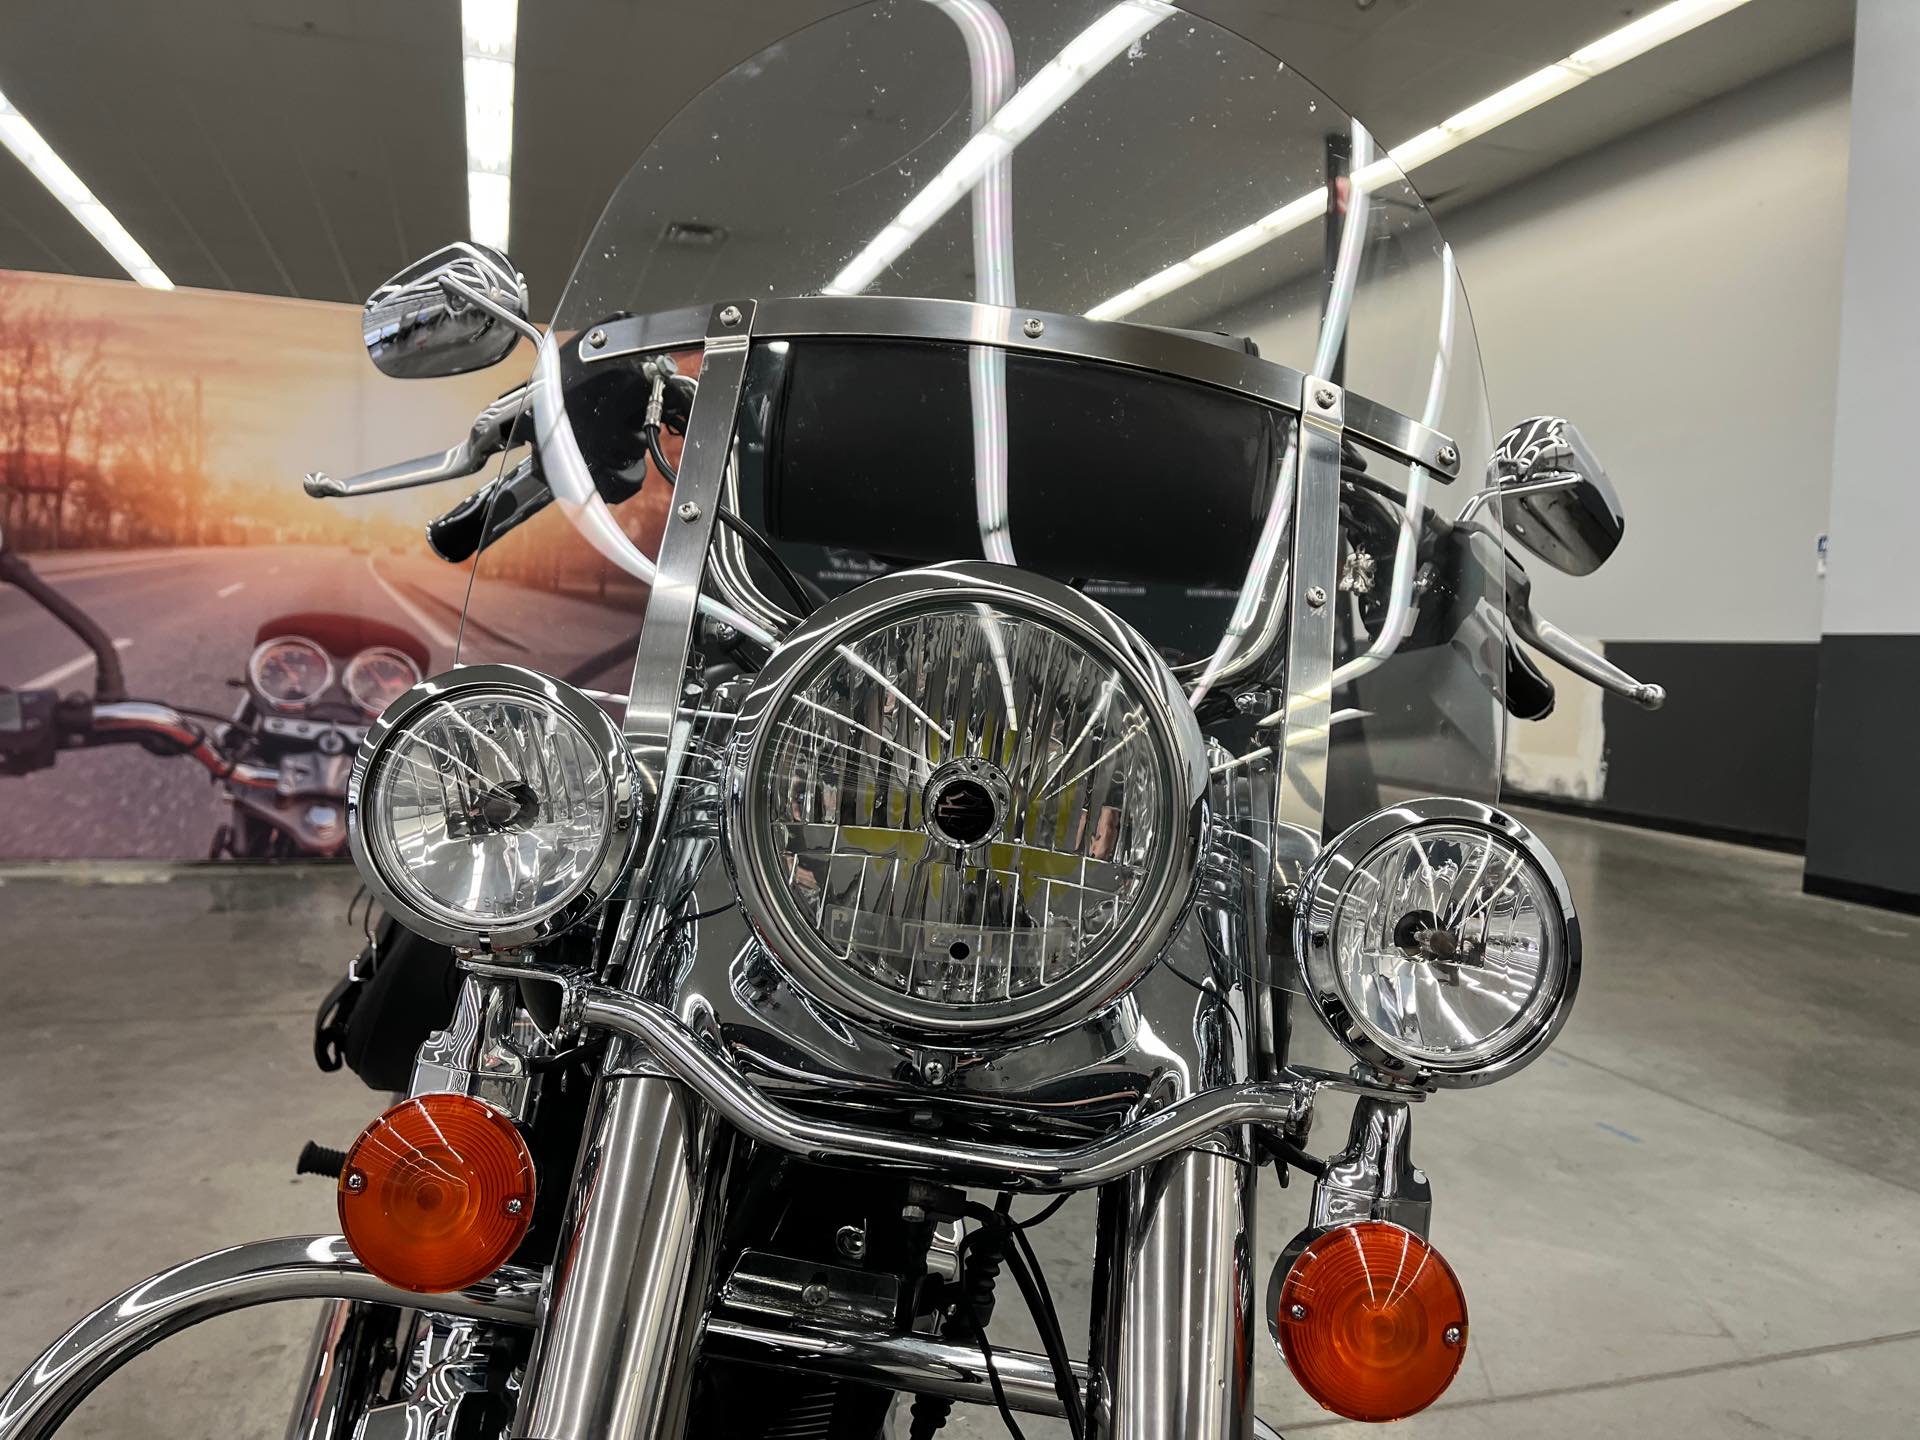 2016 Harley-Davidson Softail Heritage Softail Classic at Aces Motorcycles - Denver